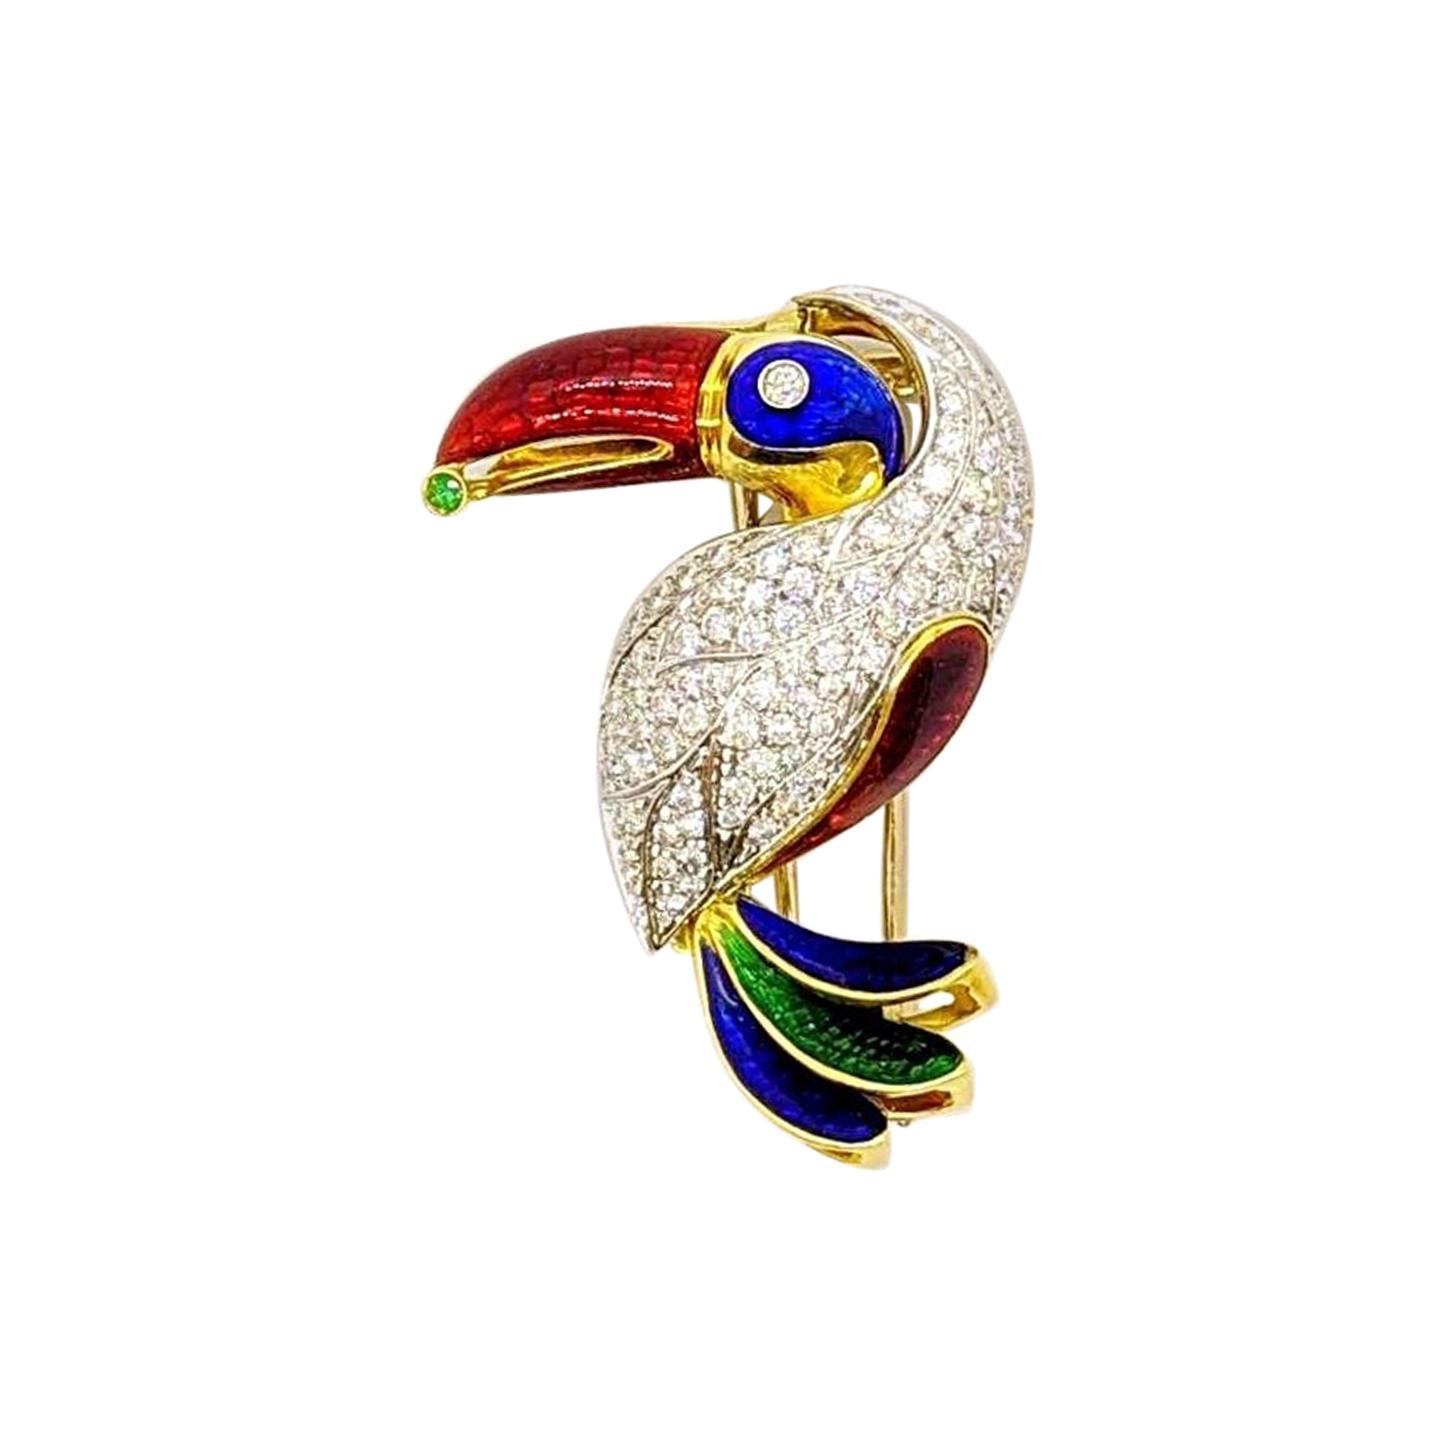 18KT Yellow & White Gold Toucan Brooch with 2.18 Carat Diamonds & Colored Enamel For Sale